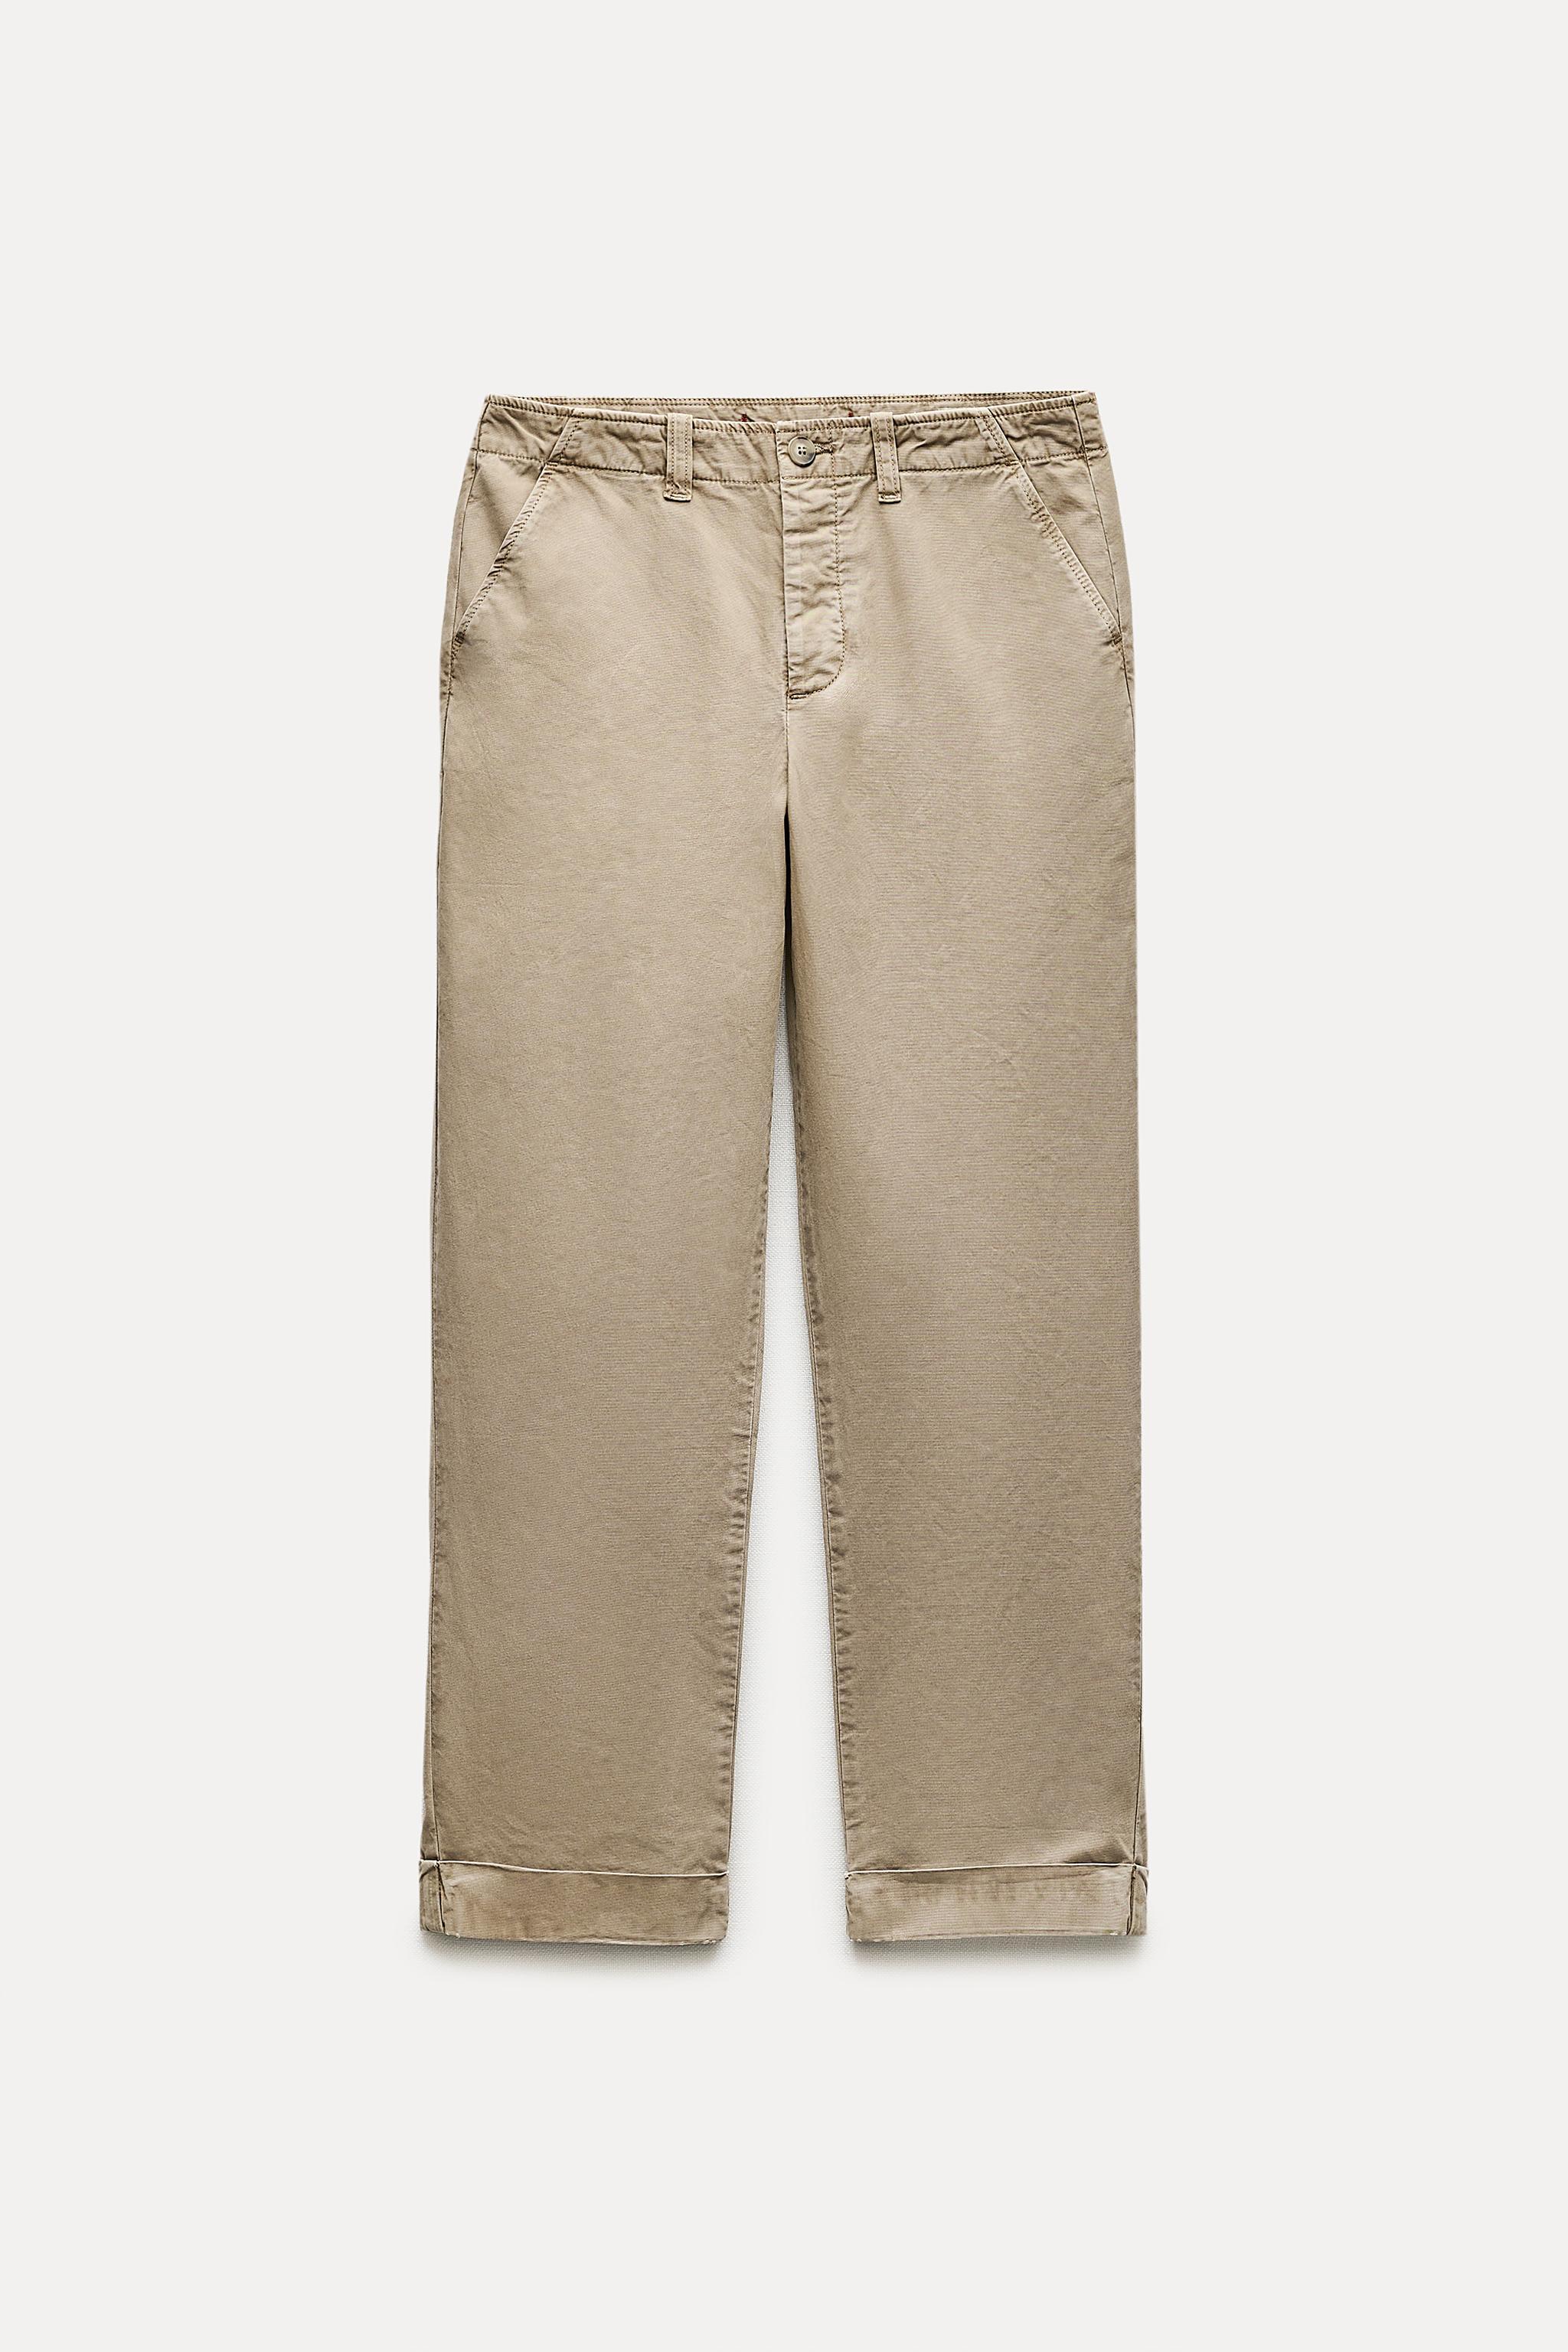 LOW RISE CHINO PANTS ZW COLLECTION